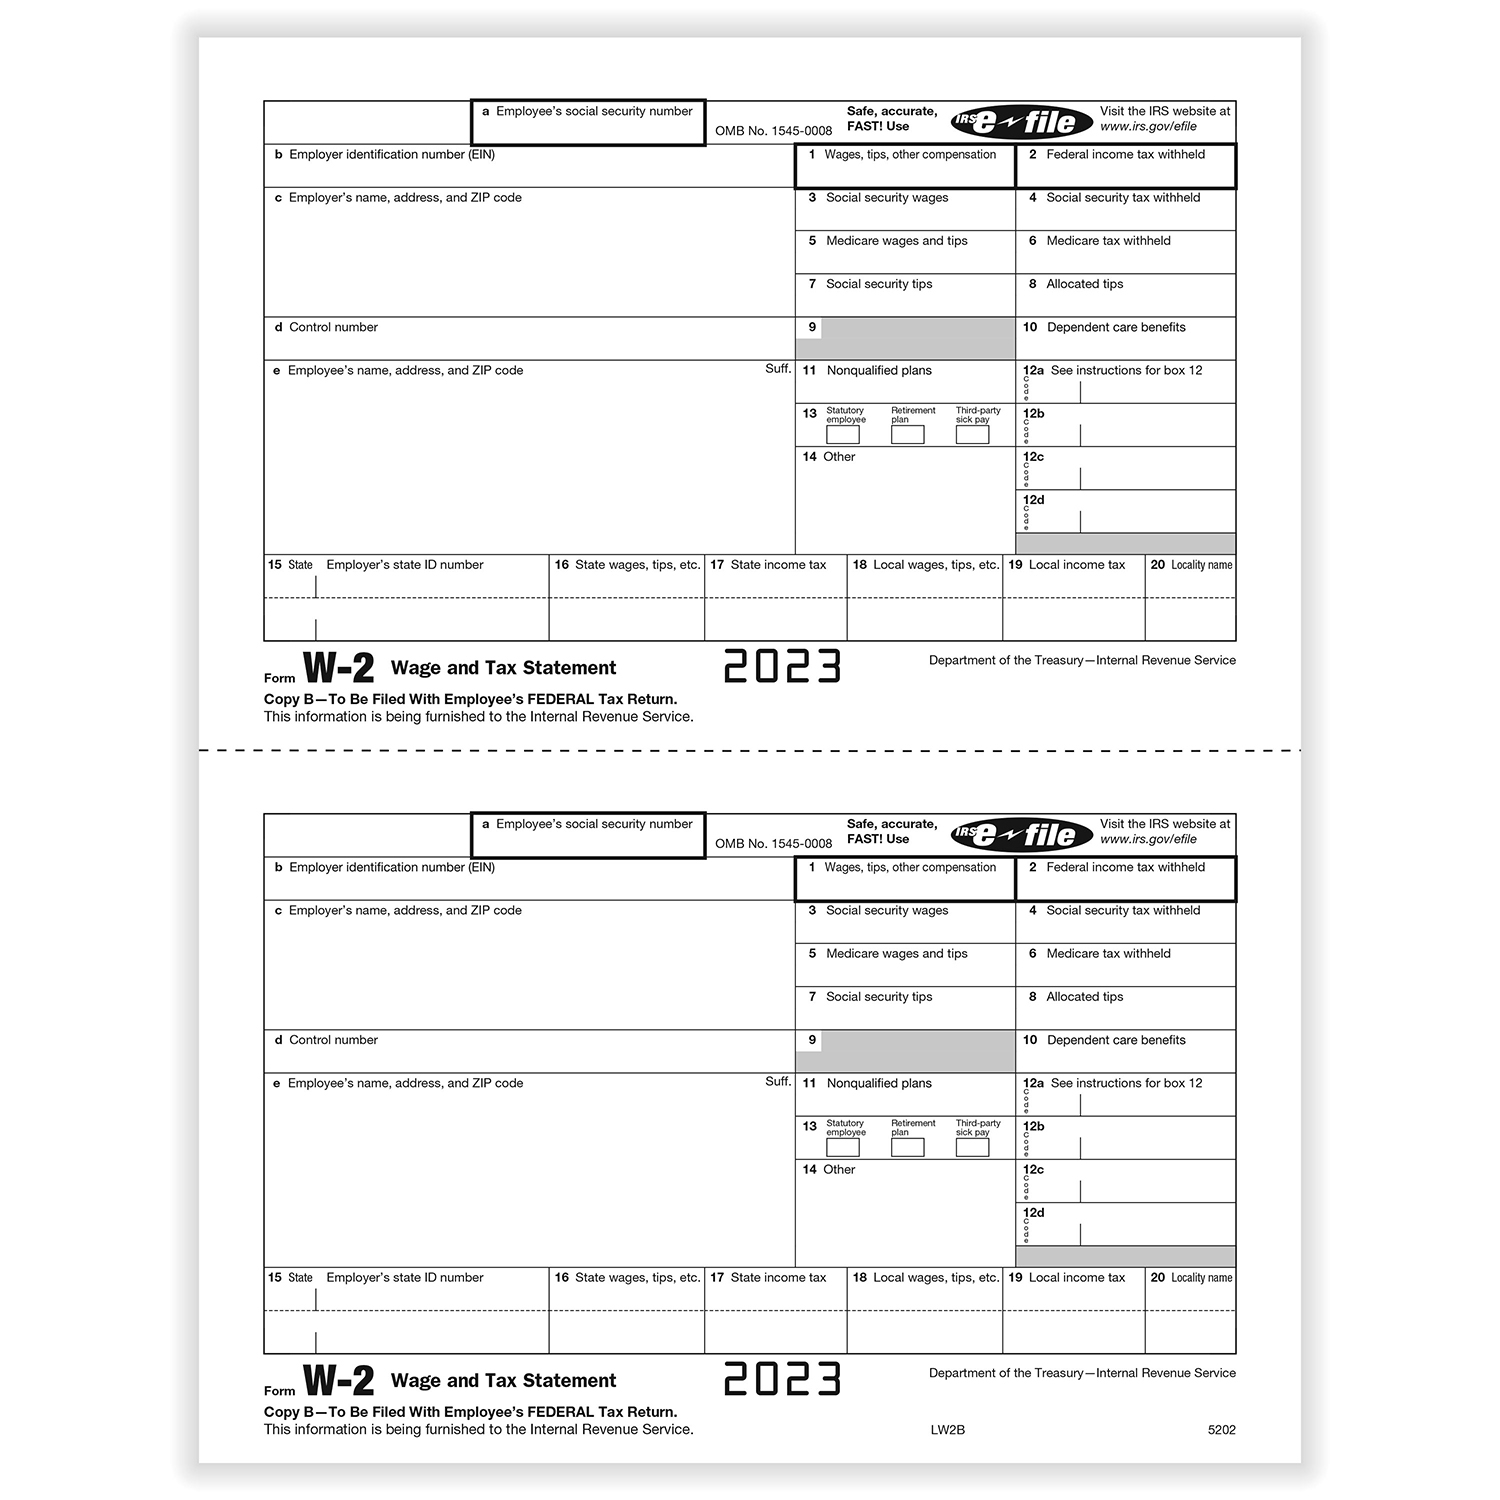 Picture of W-2 Employee Copy B